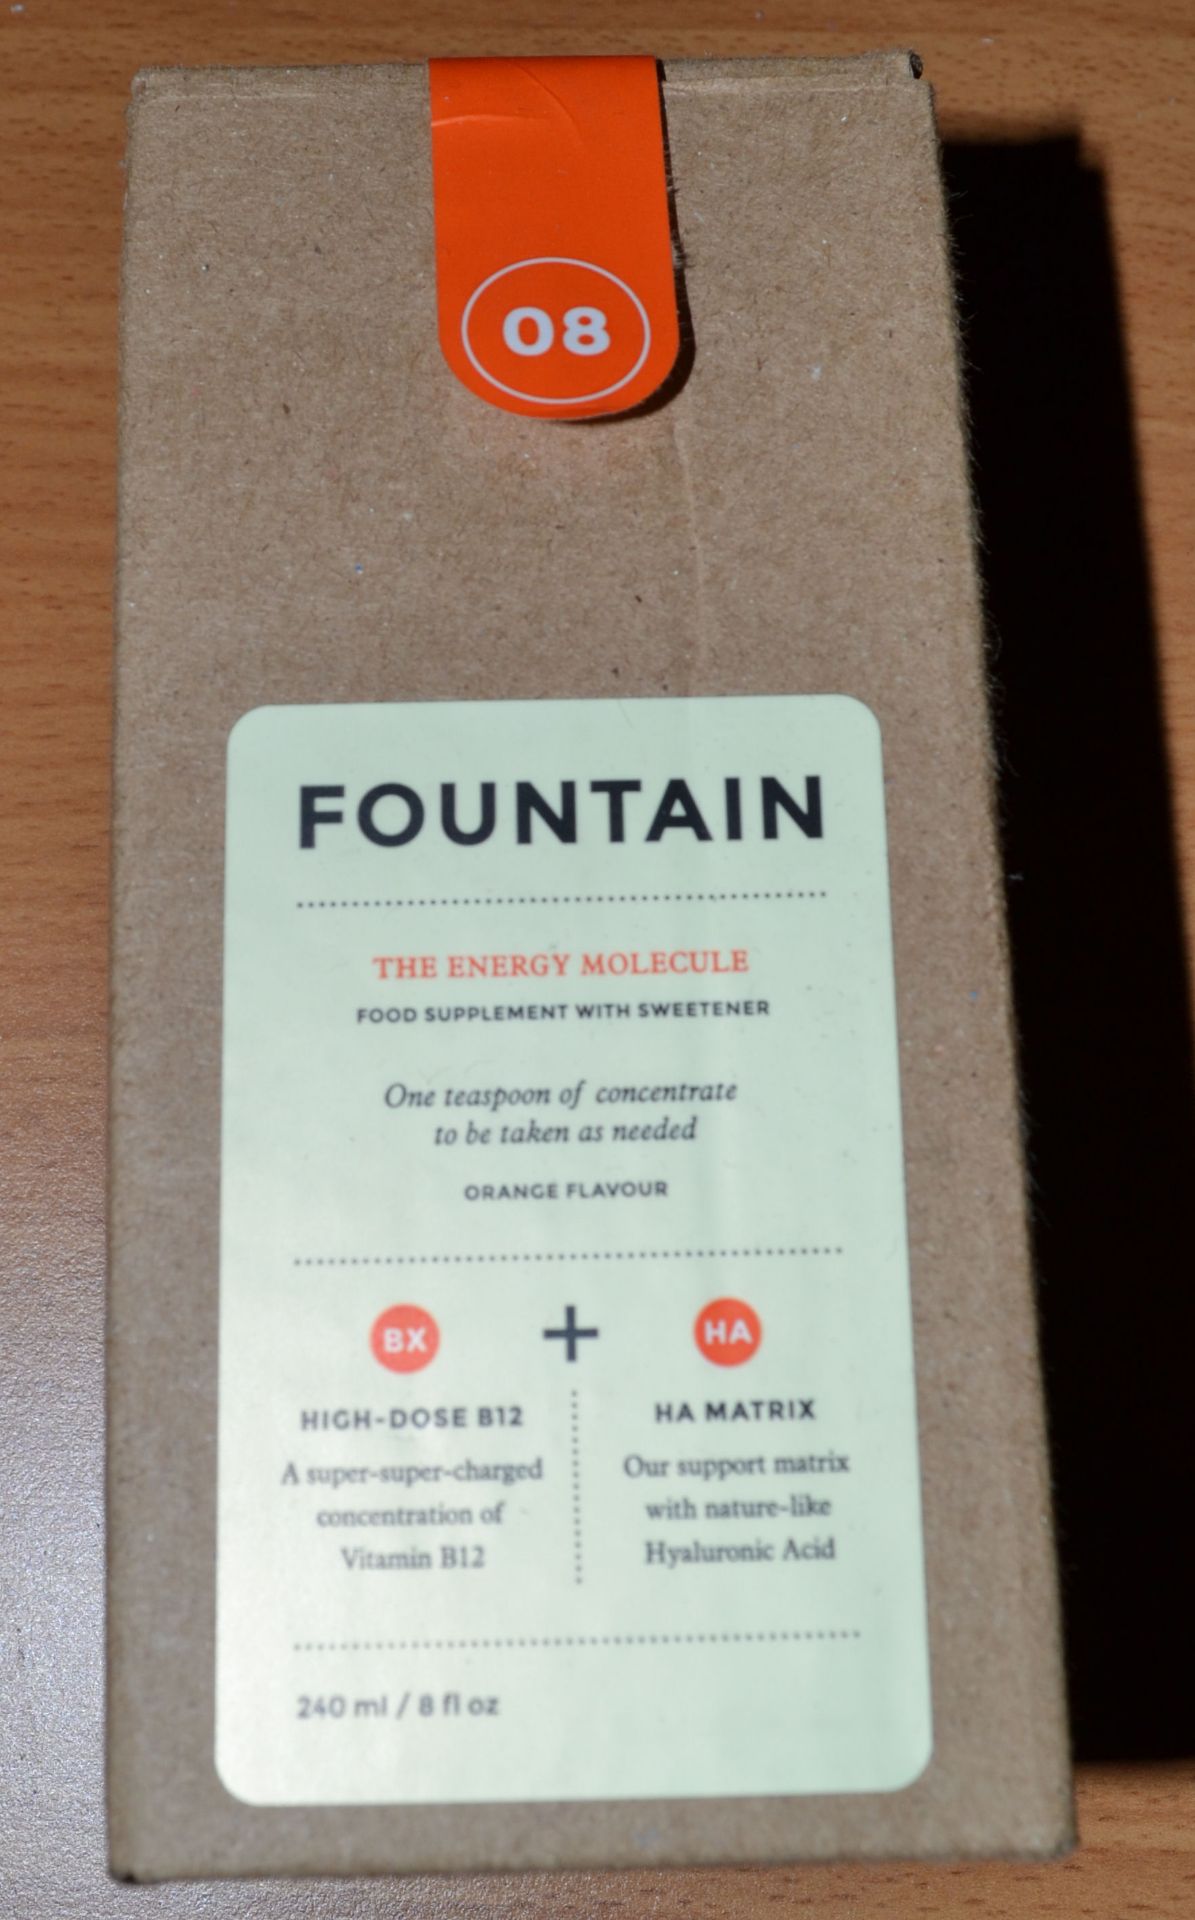 20 x 240ml Bottles of Fountain, The Energy Molecule Supplement - New & Boxed - CL185 - Ref: DRT0643 - Image 4 of 7